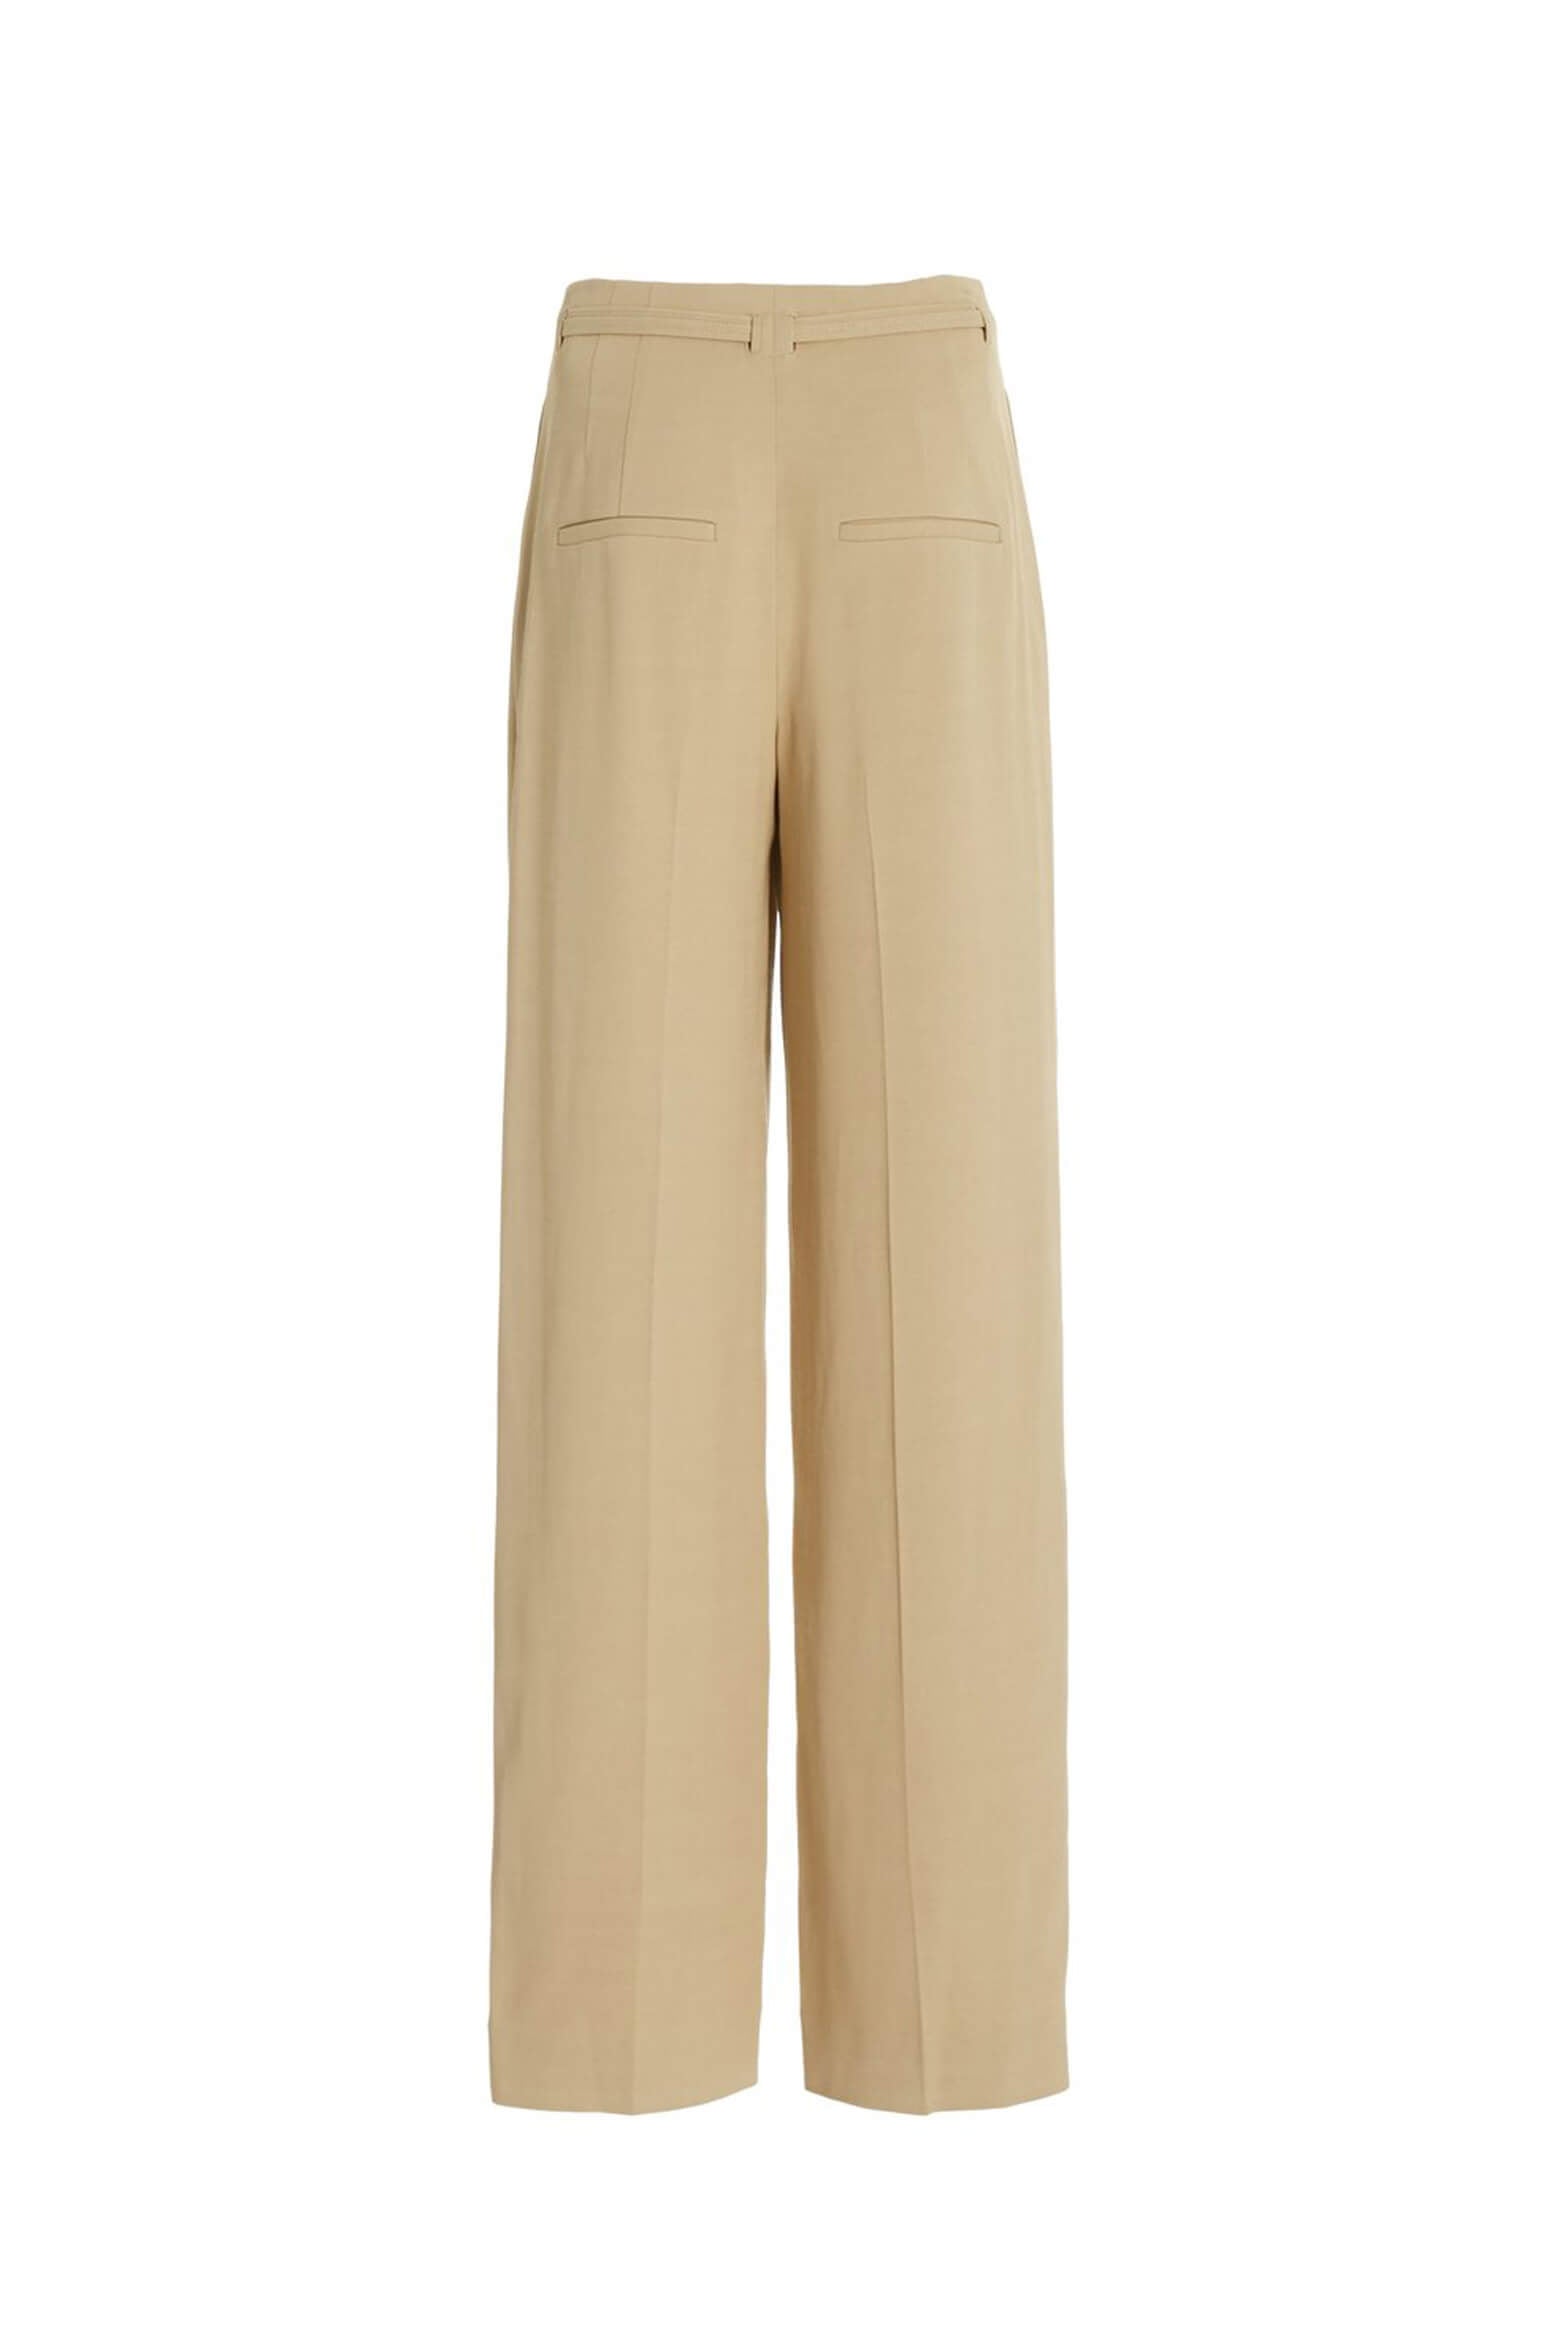 Vince High Waist Belted Pant in Beige from The New Trend